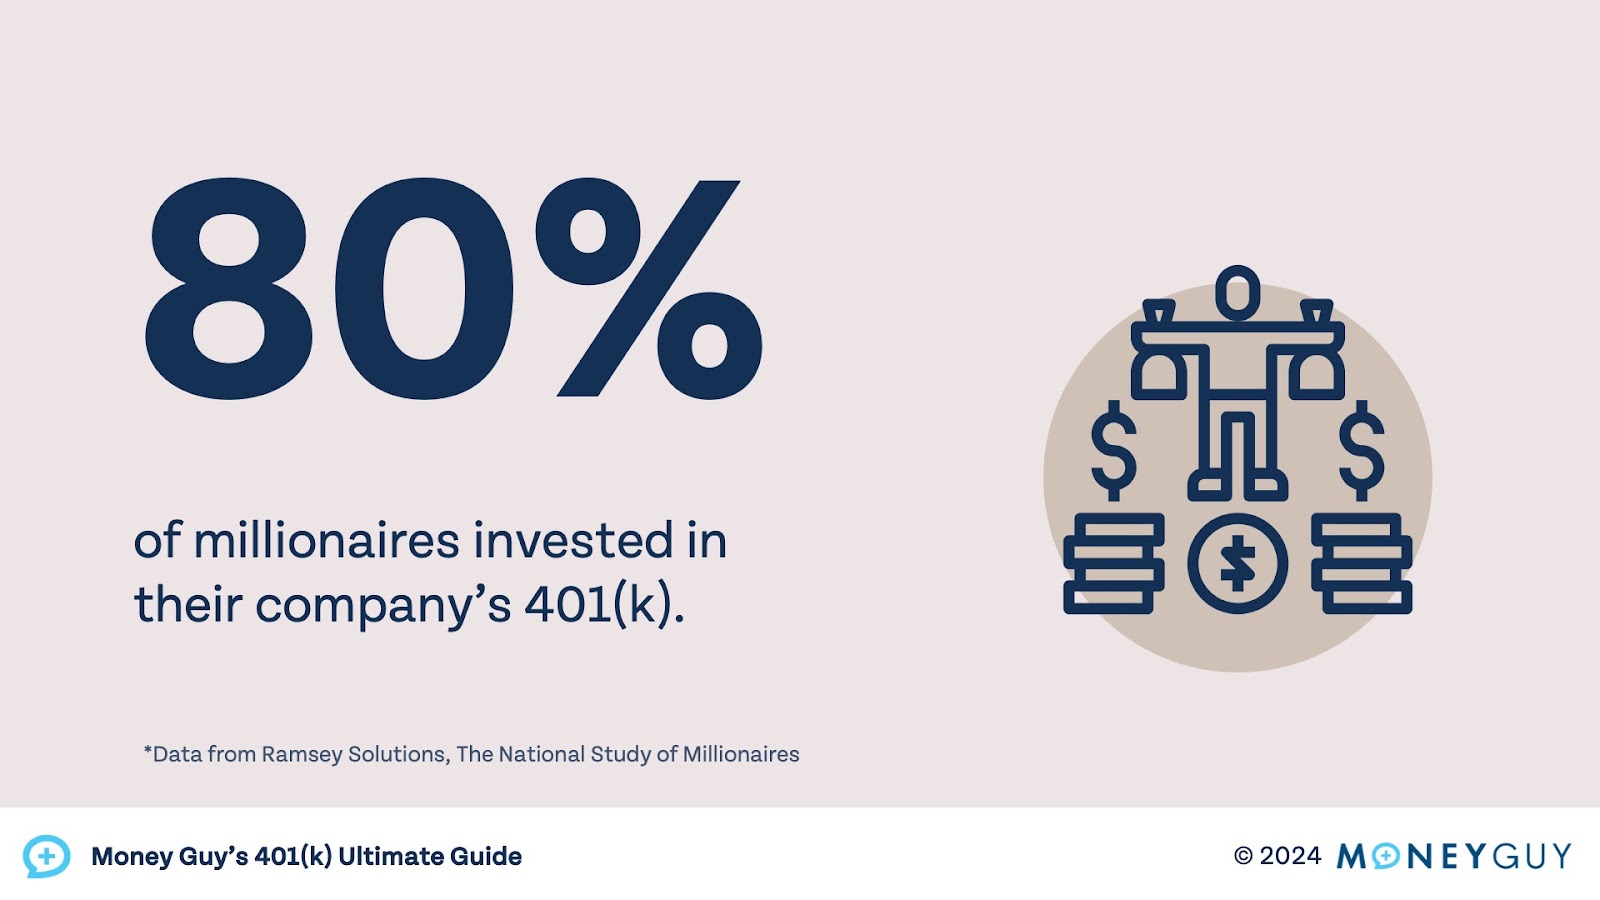 80% of millionaires invest in their company's 401(k) plan.